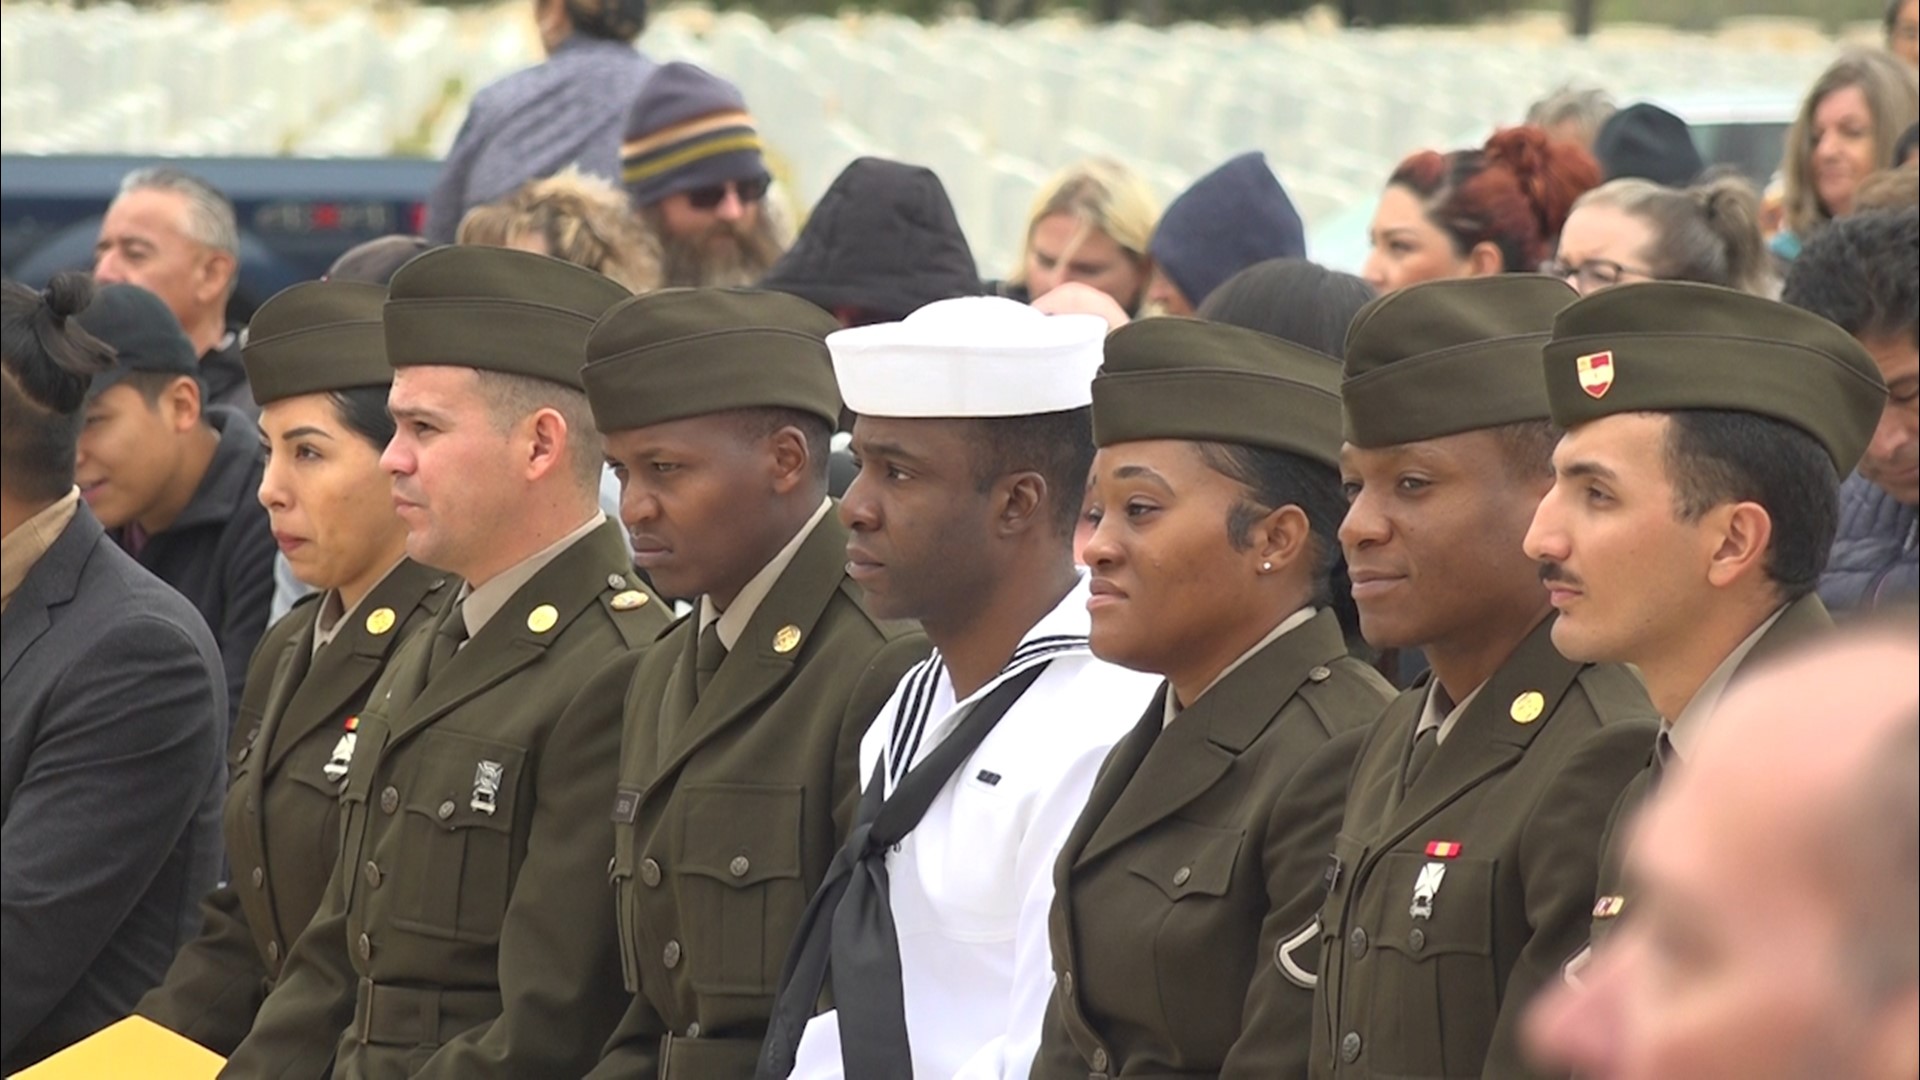 Nine veterans became U.S. citizens at Fort Sam Houston National Cemetery on Saturday morning.